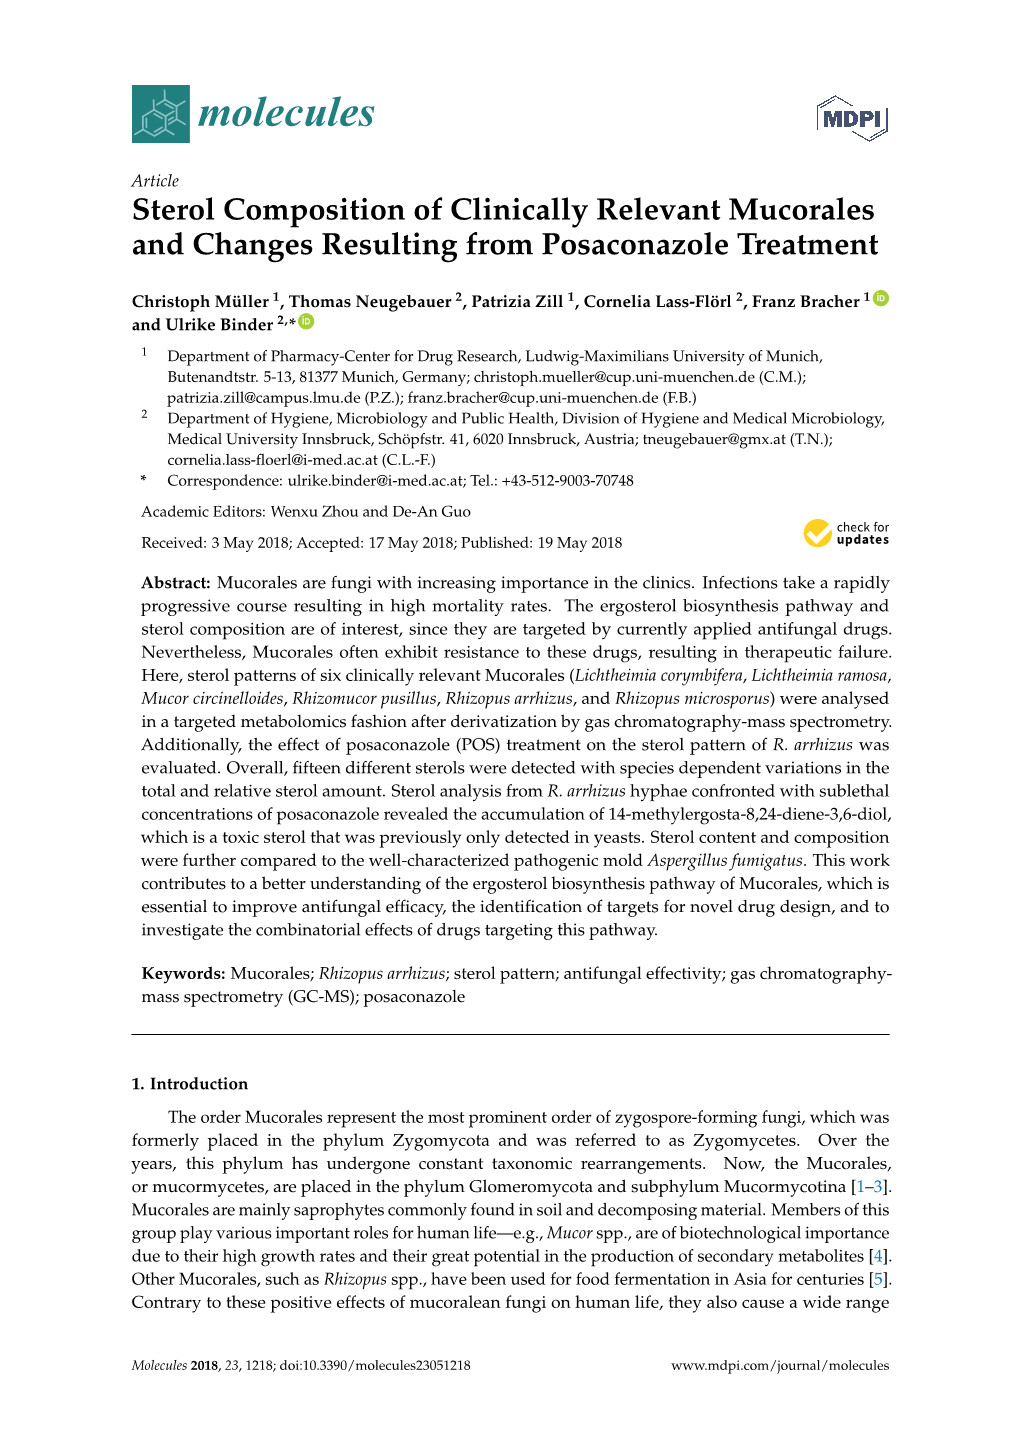 Sterol Composition of Clinically Relevant Mucorales and Changes Resulting from Posaconazole Treatment